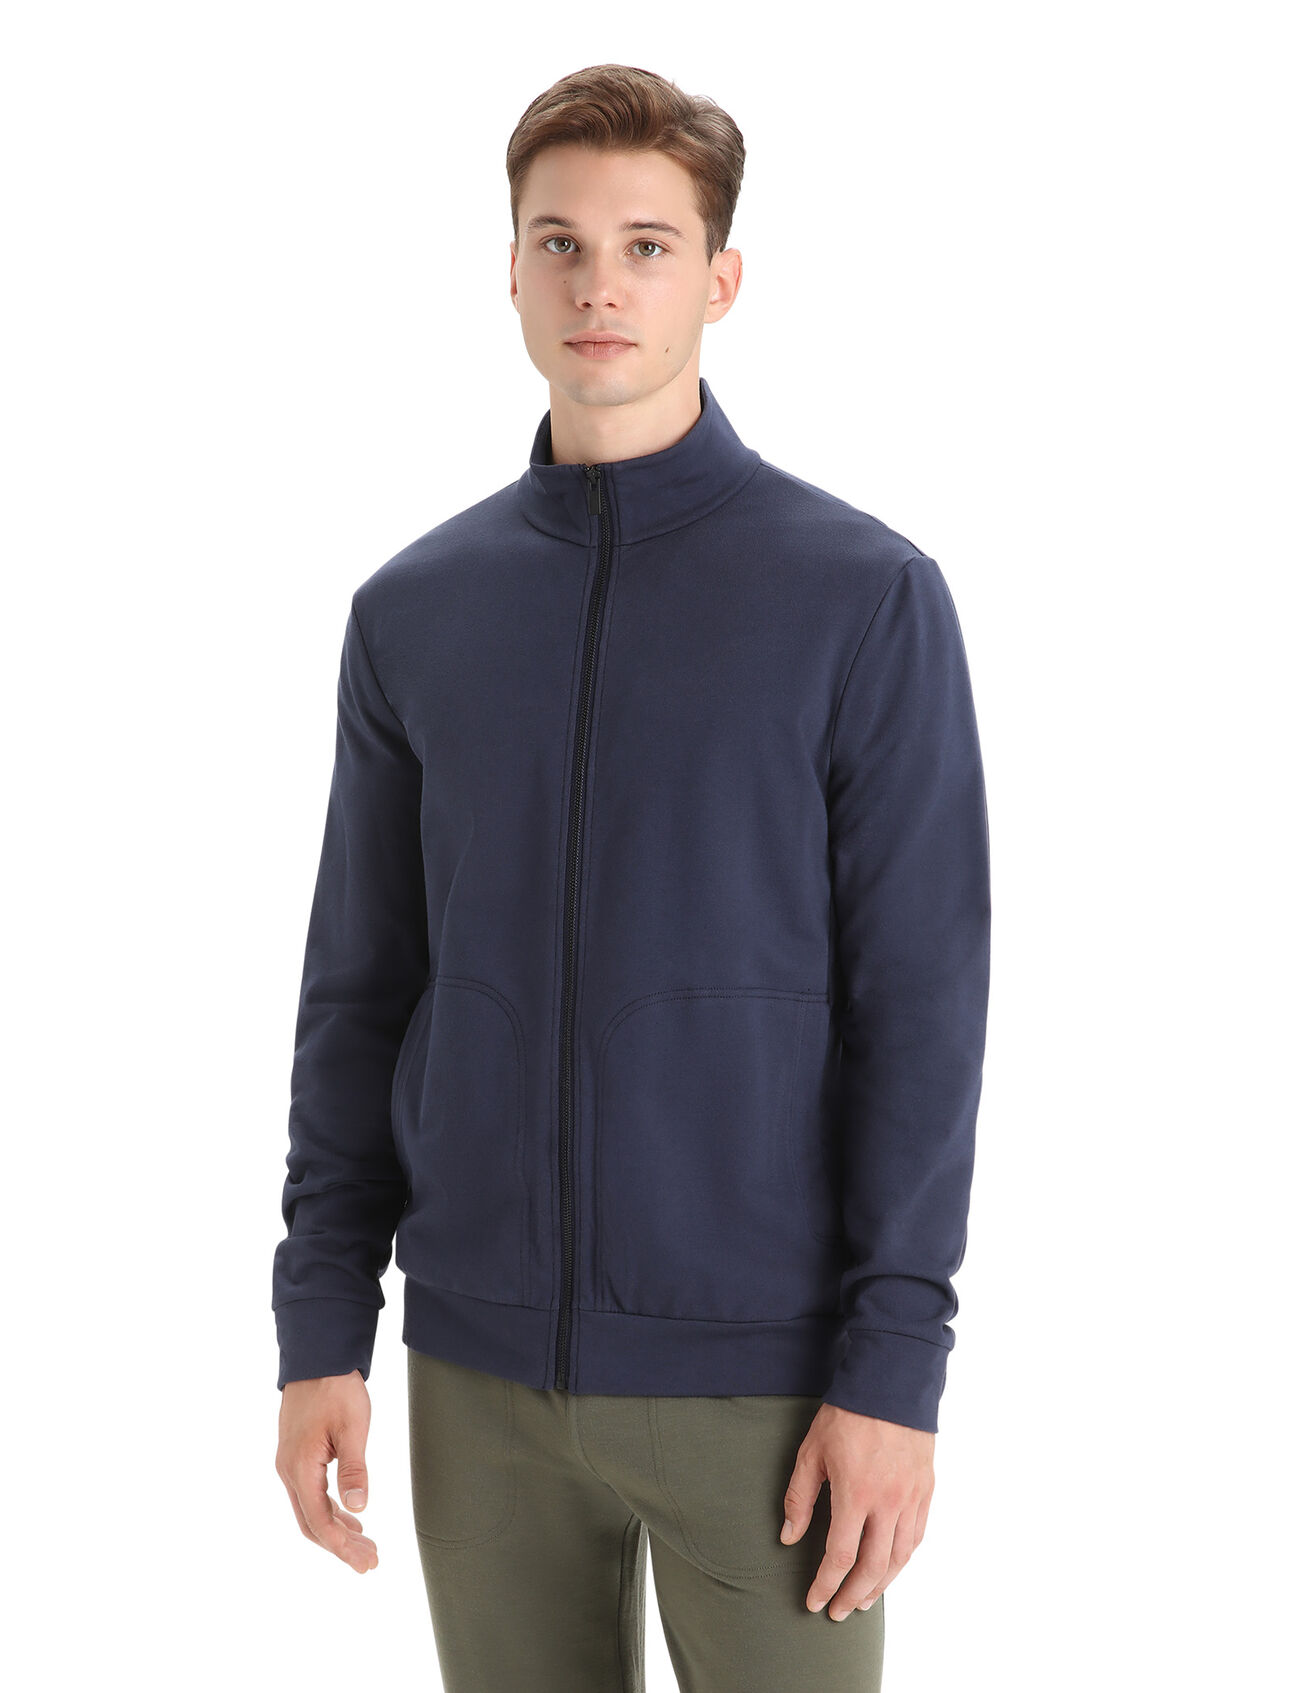 Mens Merino Central Classic Long Sleeve Zip A clean, classic and comfortable everyday sweatshirt that blends natural merino wool with organically grown cotton, the Central Classic Long Sleeve Zip is durable, breathable and incredibly versatile.  